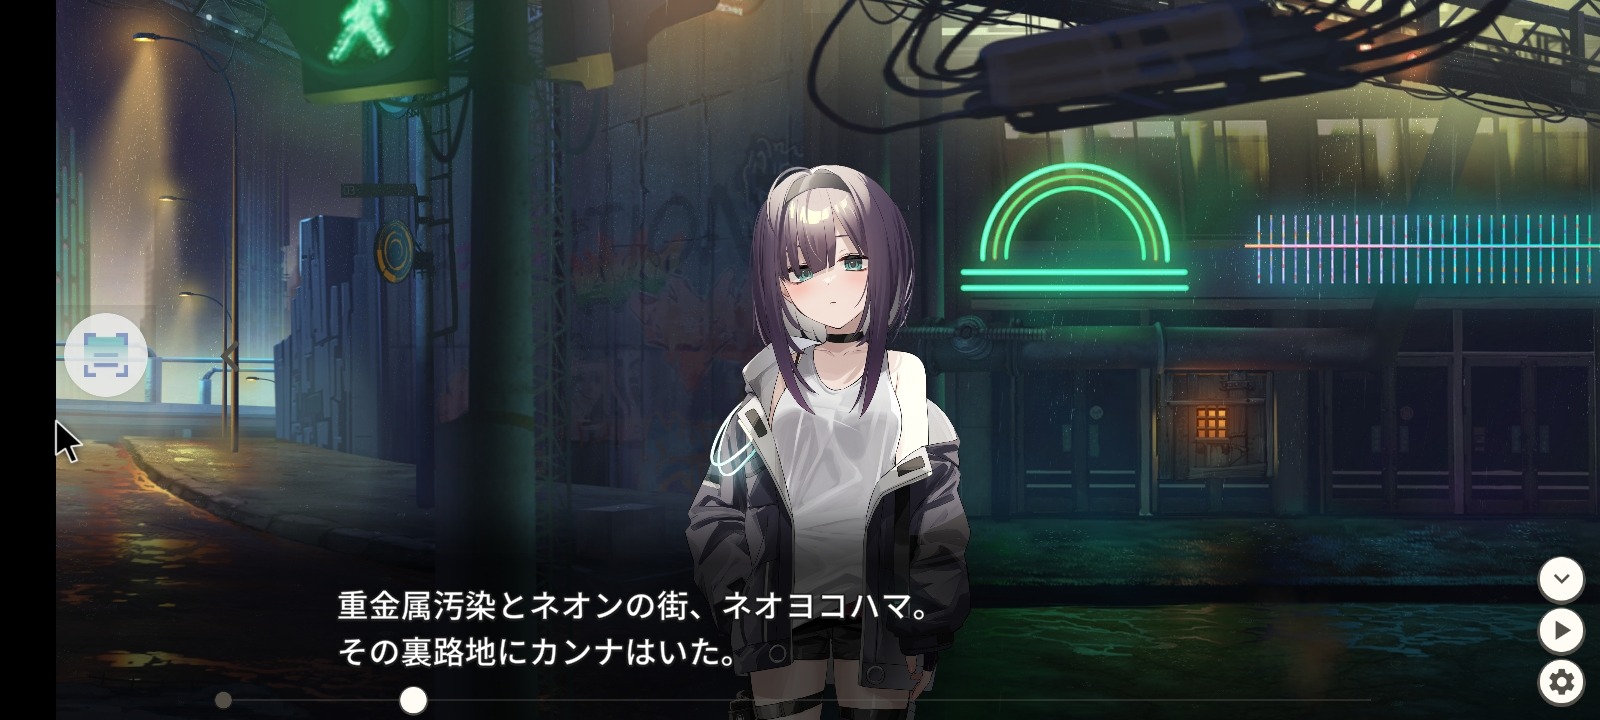 Preview Game Dead End City 退廃の街の少女 By Haylinkgame Telegraph